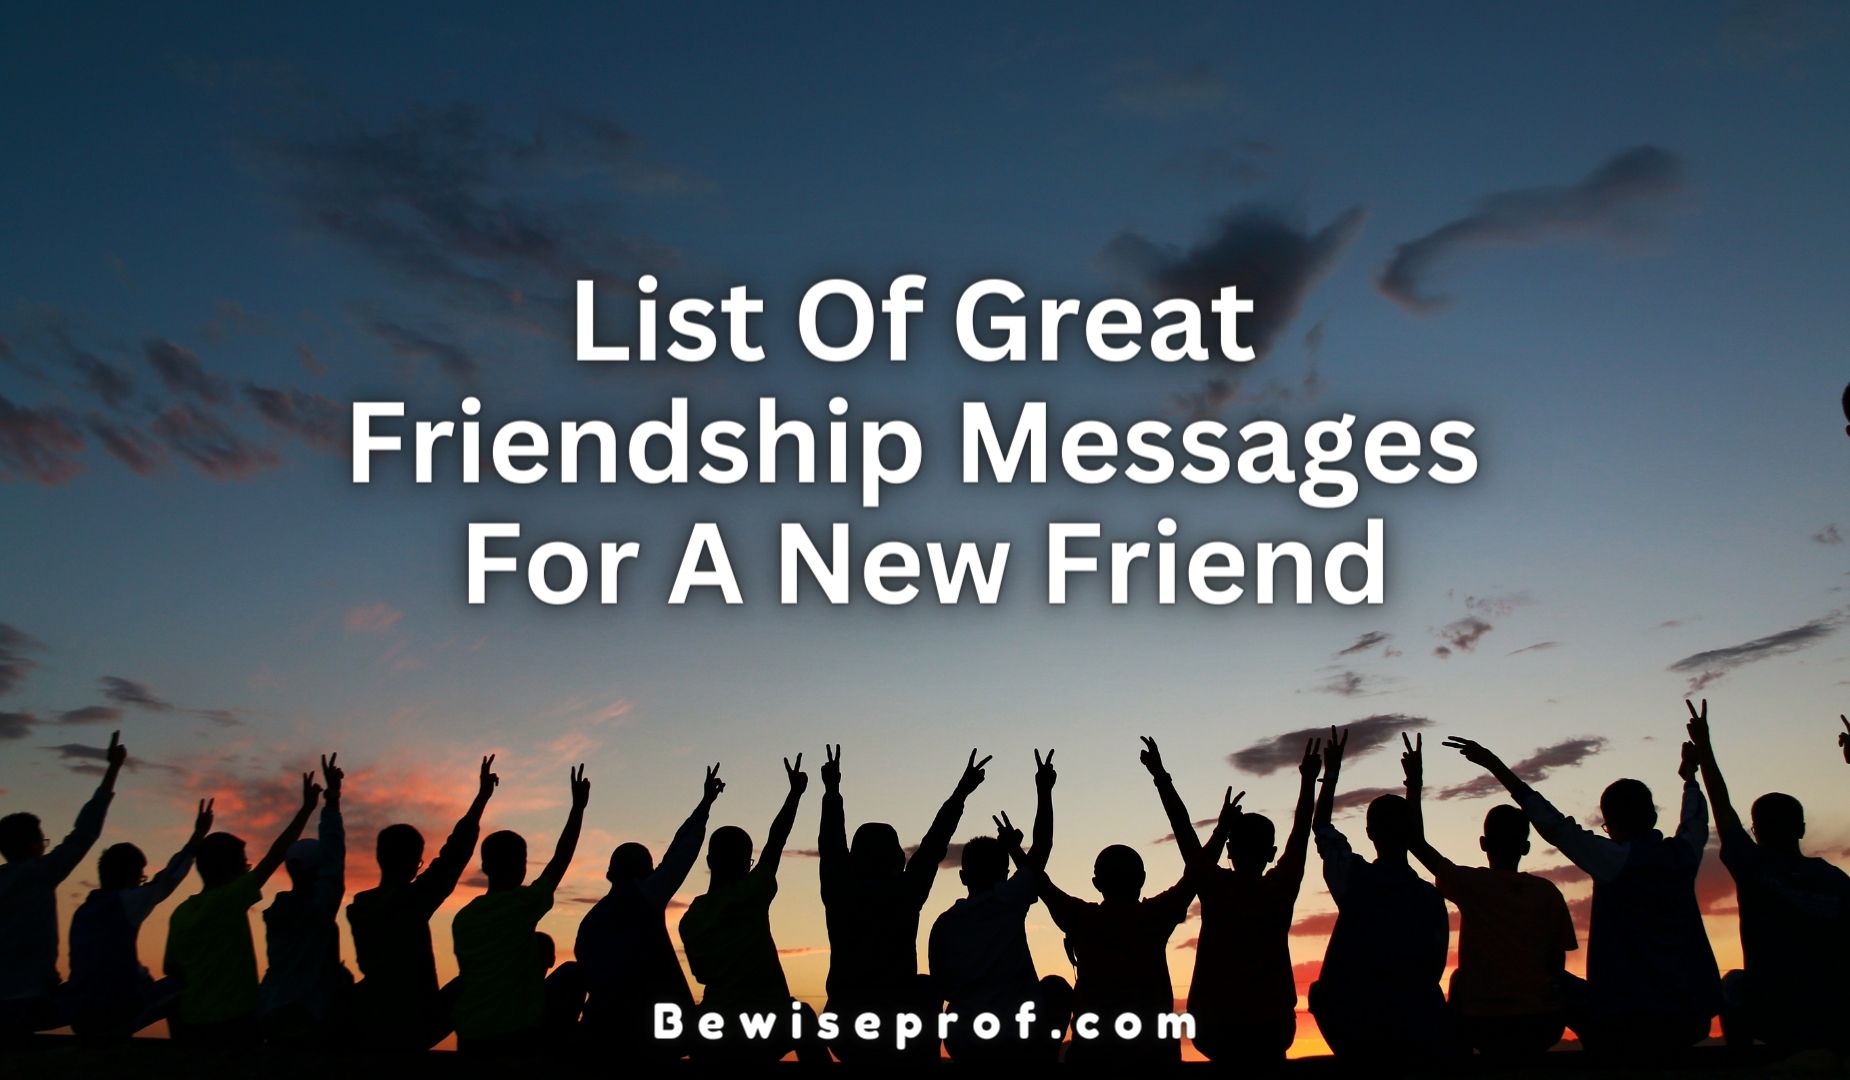 List Of Great Friendship Messages For A New Friend